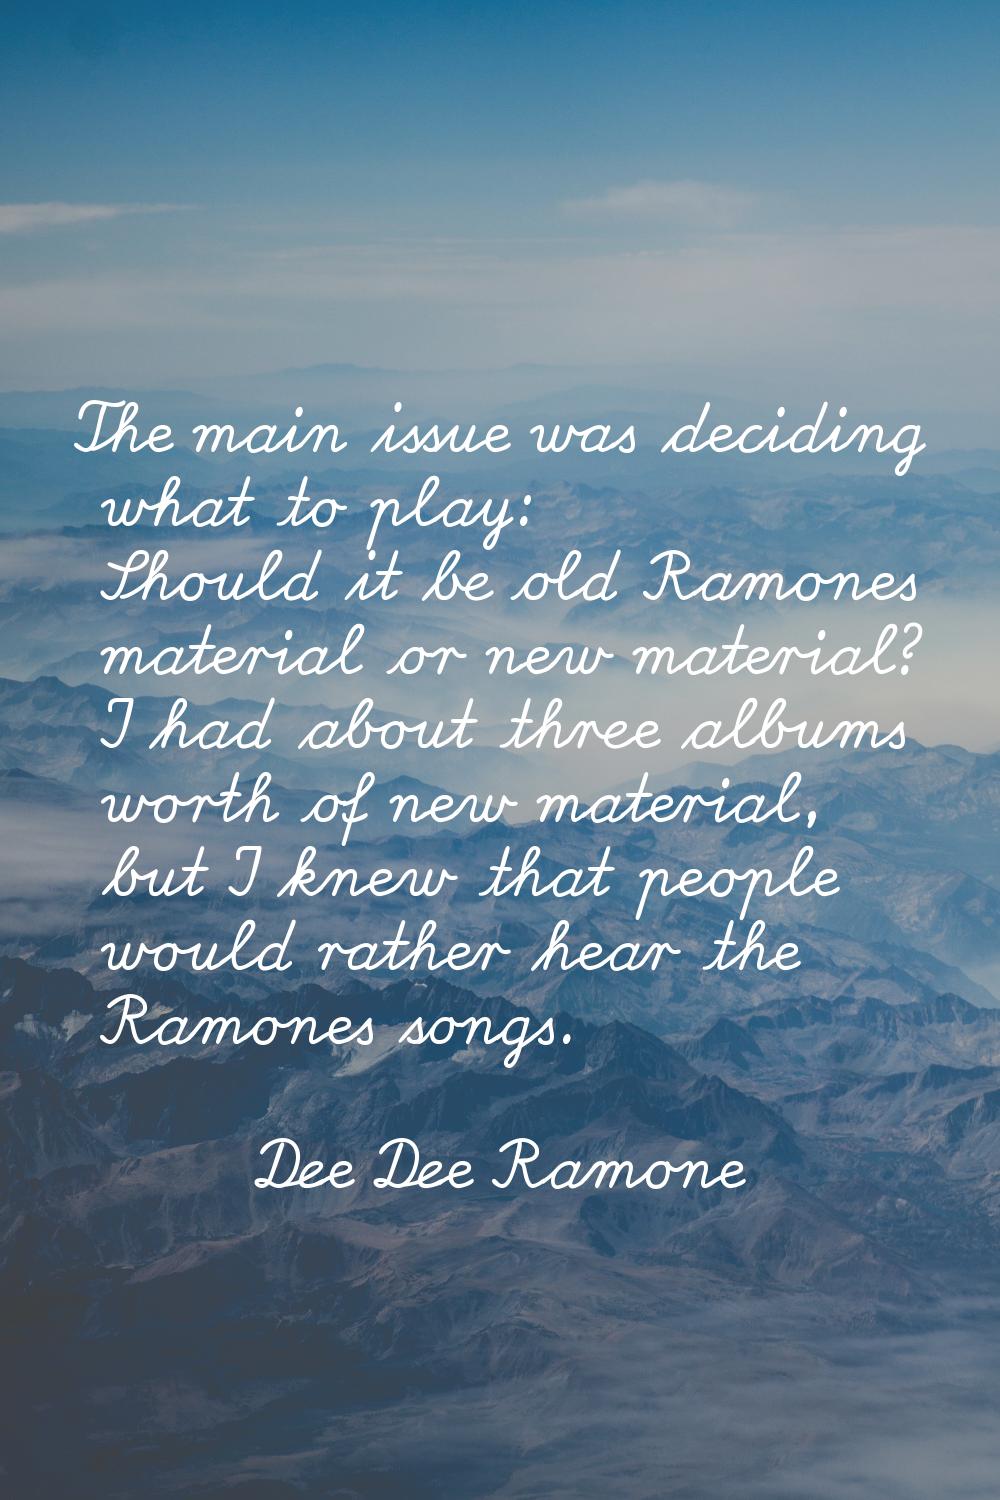 The main issue was deciding what to play: Should it be old Ramones material or new material? I had 